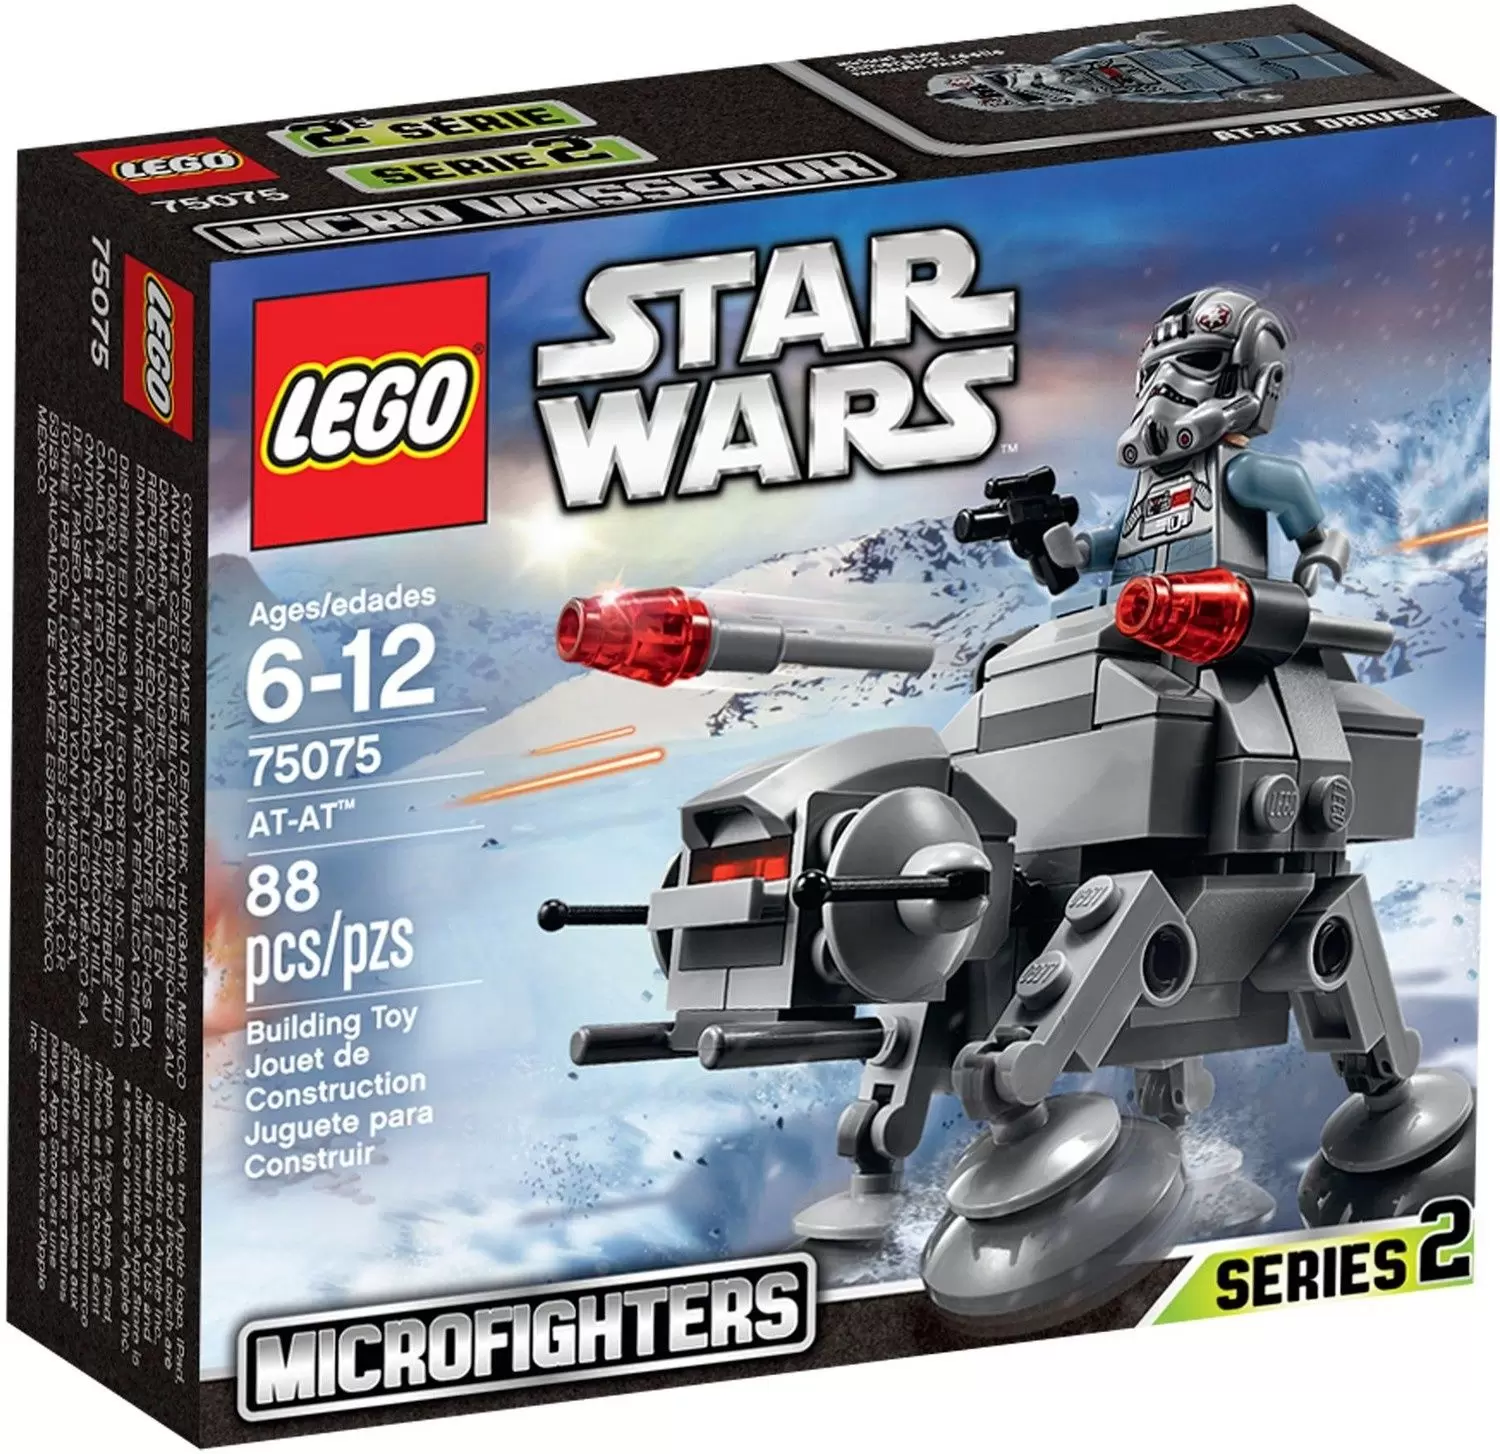 LEGO Star Wars - AT-AT (Microfighters)